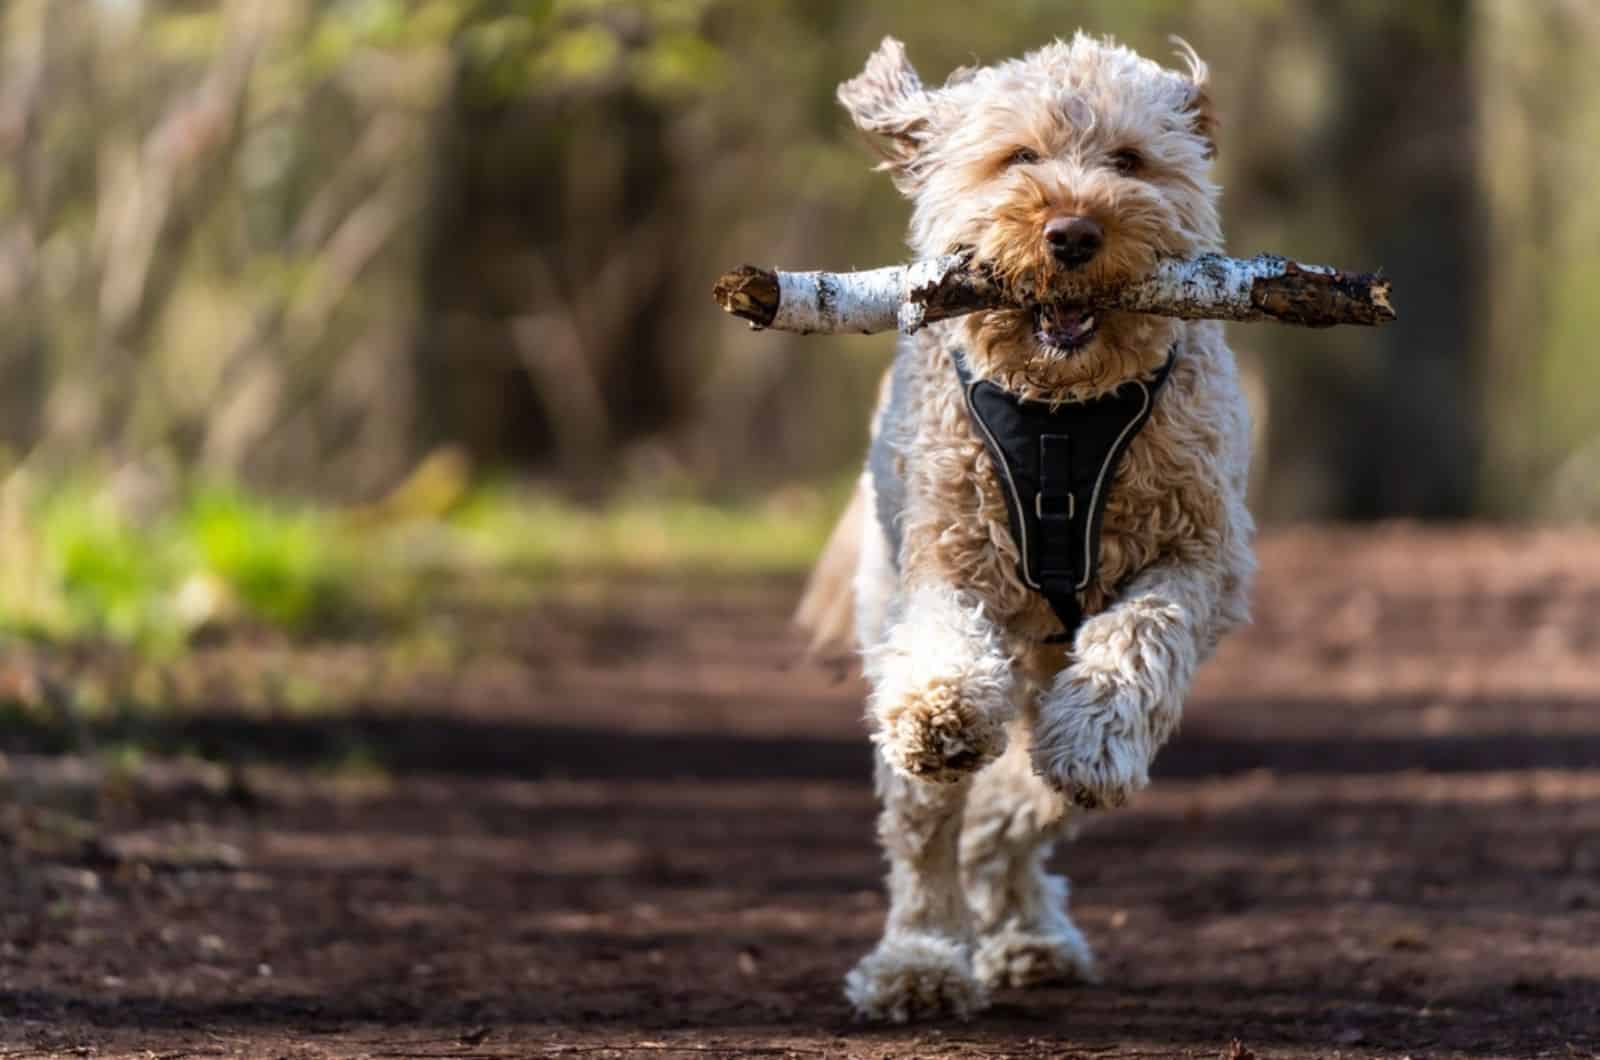 goldendoodle running in the park with a stick in his mouth